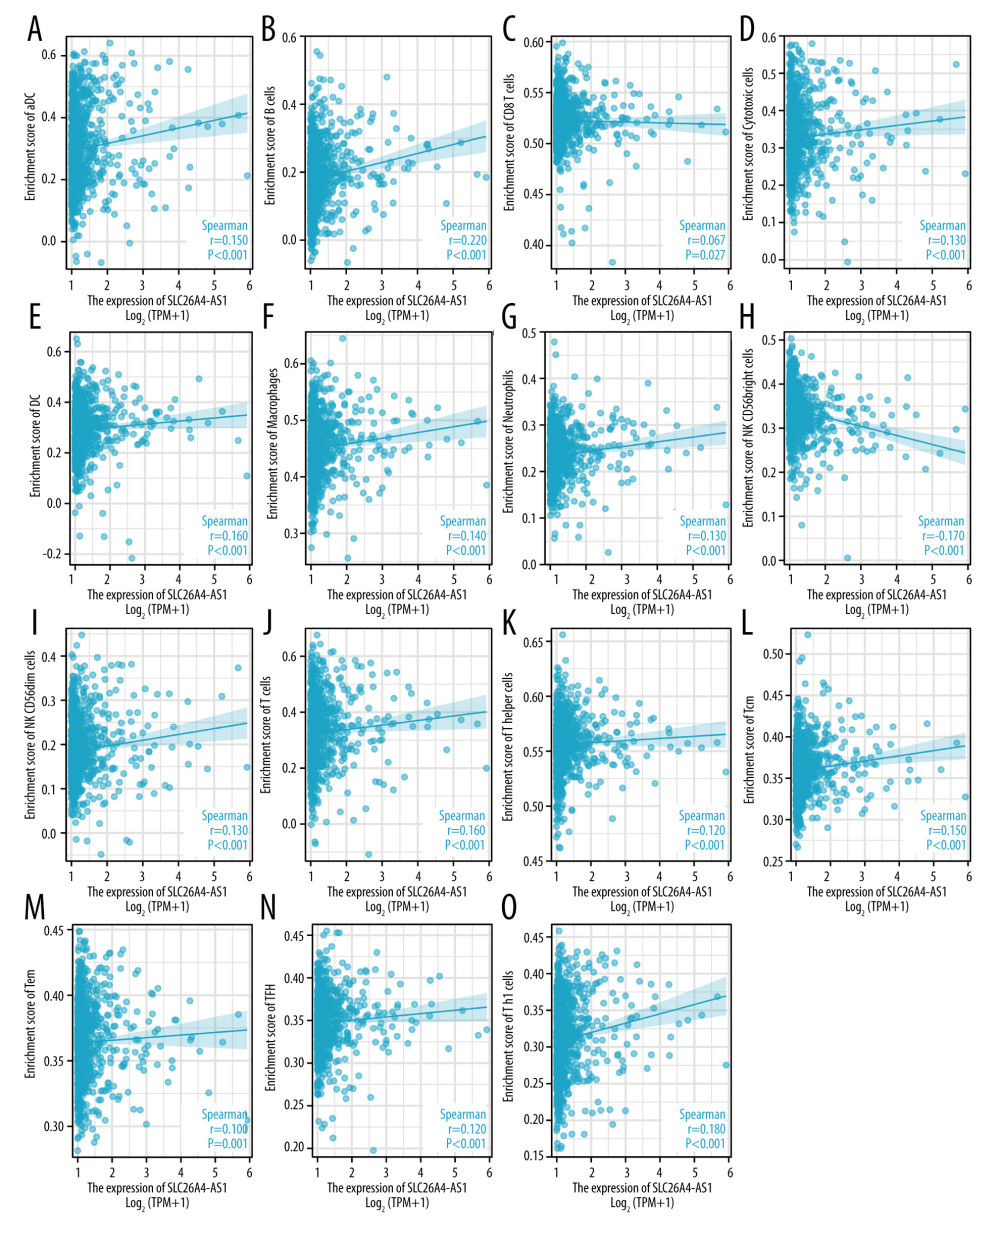 Correlation of SLC26A4-AS1 expression with 24 immune cells in patients with breast cancer (scatter plot). (A) aDC, (B) B cells, (C) CD8 T cells, (D) cytotoxic cells, (E) DC, (F) macrophages, (G) neutrophils, (H) NK CD56bright cells, (I) NK CD56dim cells, (J) T cells, (K) T helper cells, (L) Tcm, (M) Tem, (N) TFH, and (O) Th1 cells.